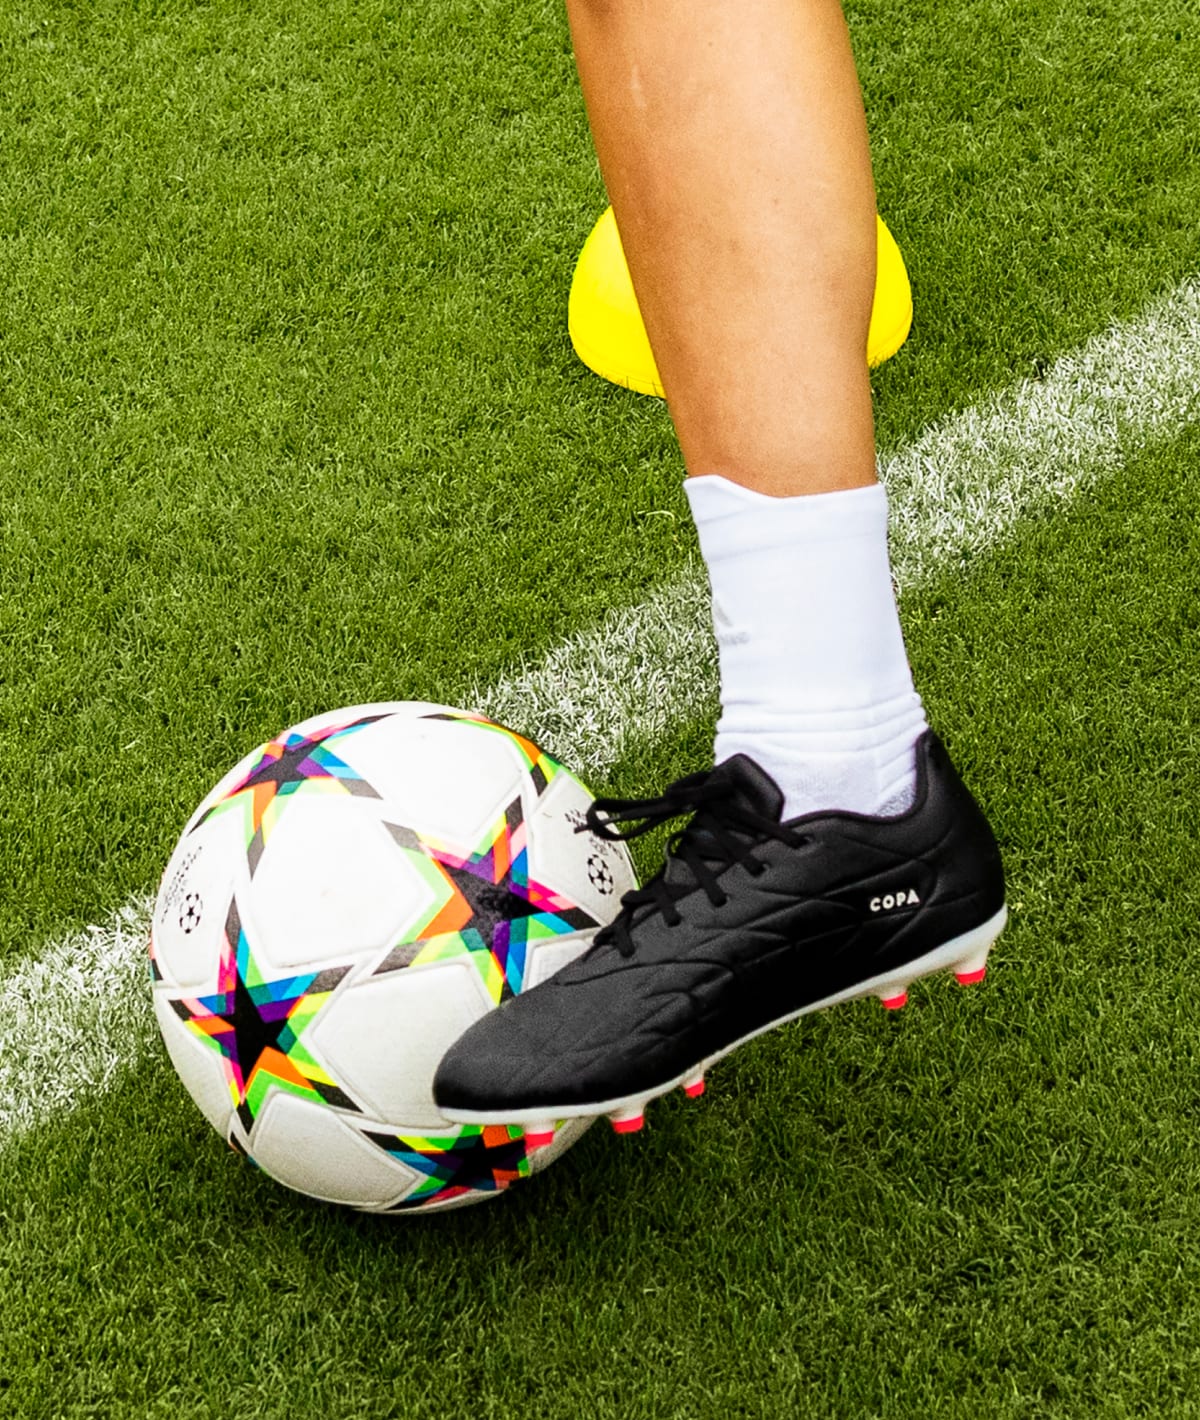 How to Buy Soccer Cleats: Fit, Features, Field Surface